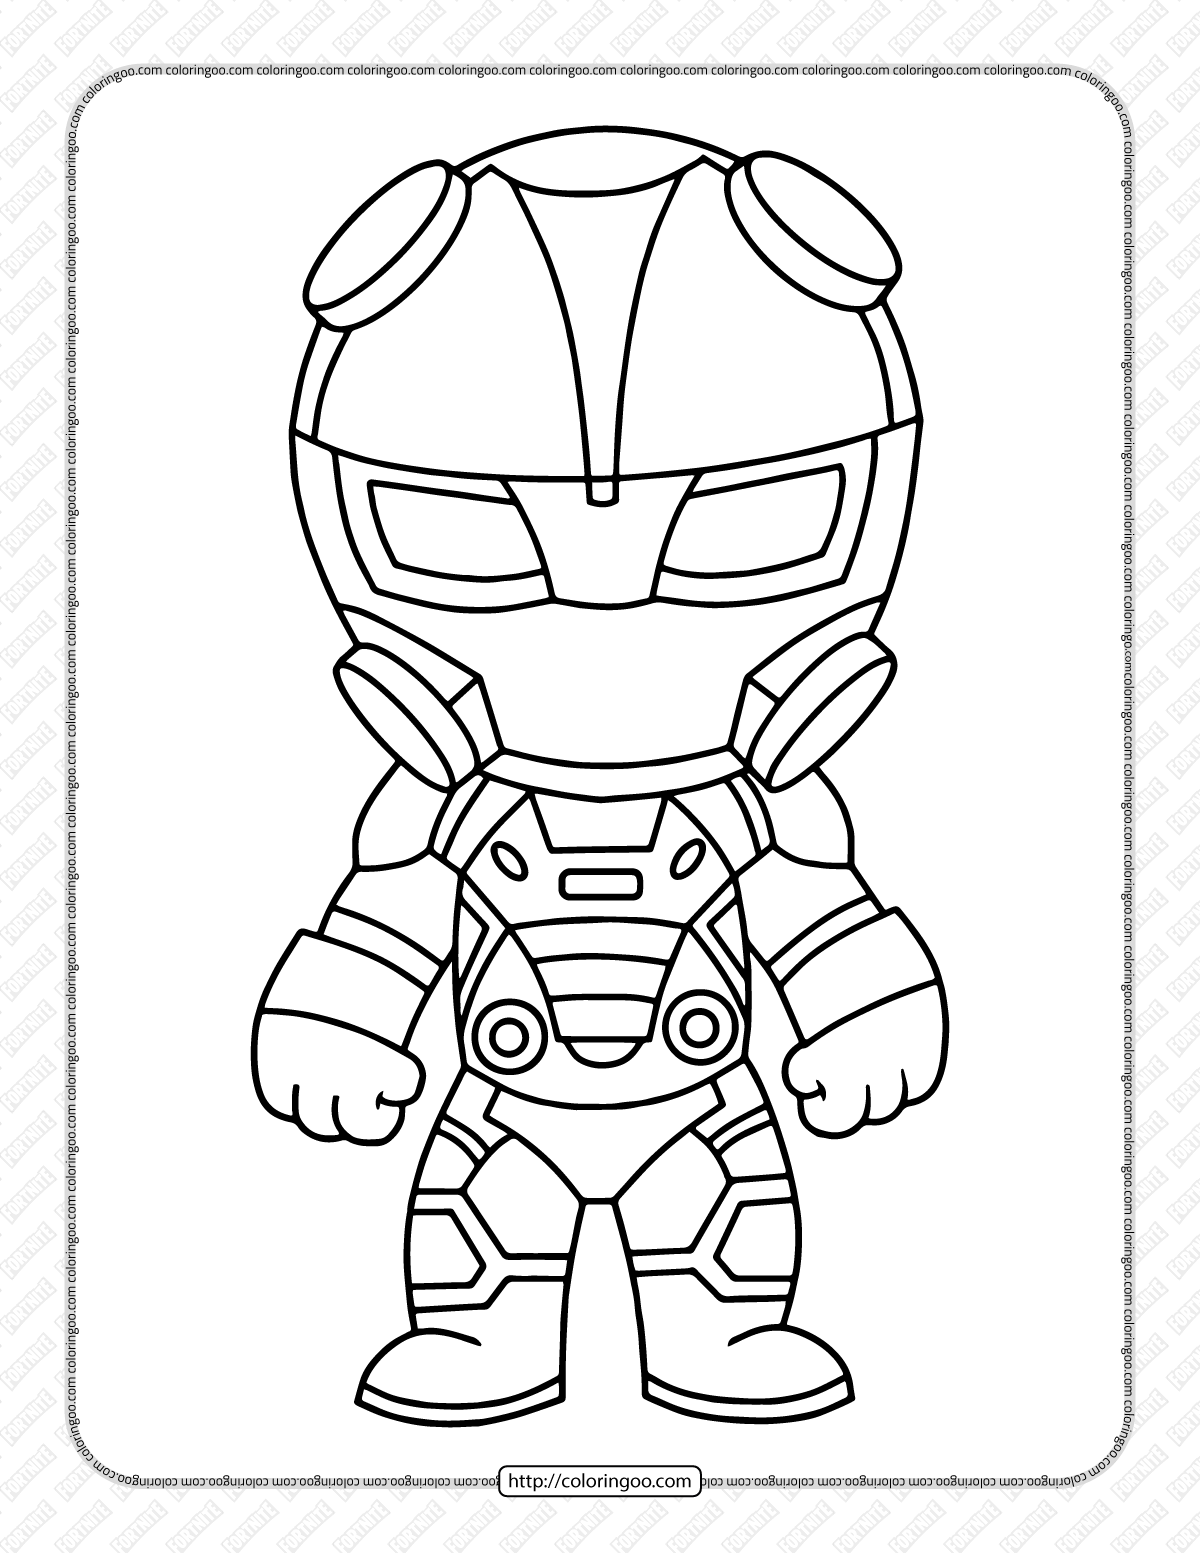 chibi fortnite coloring pages 10